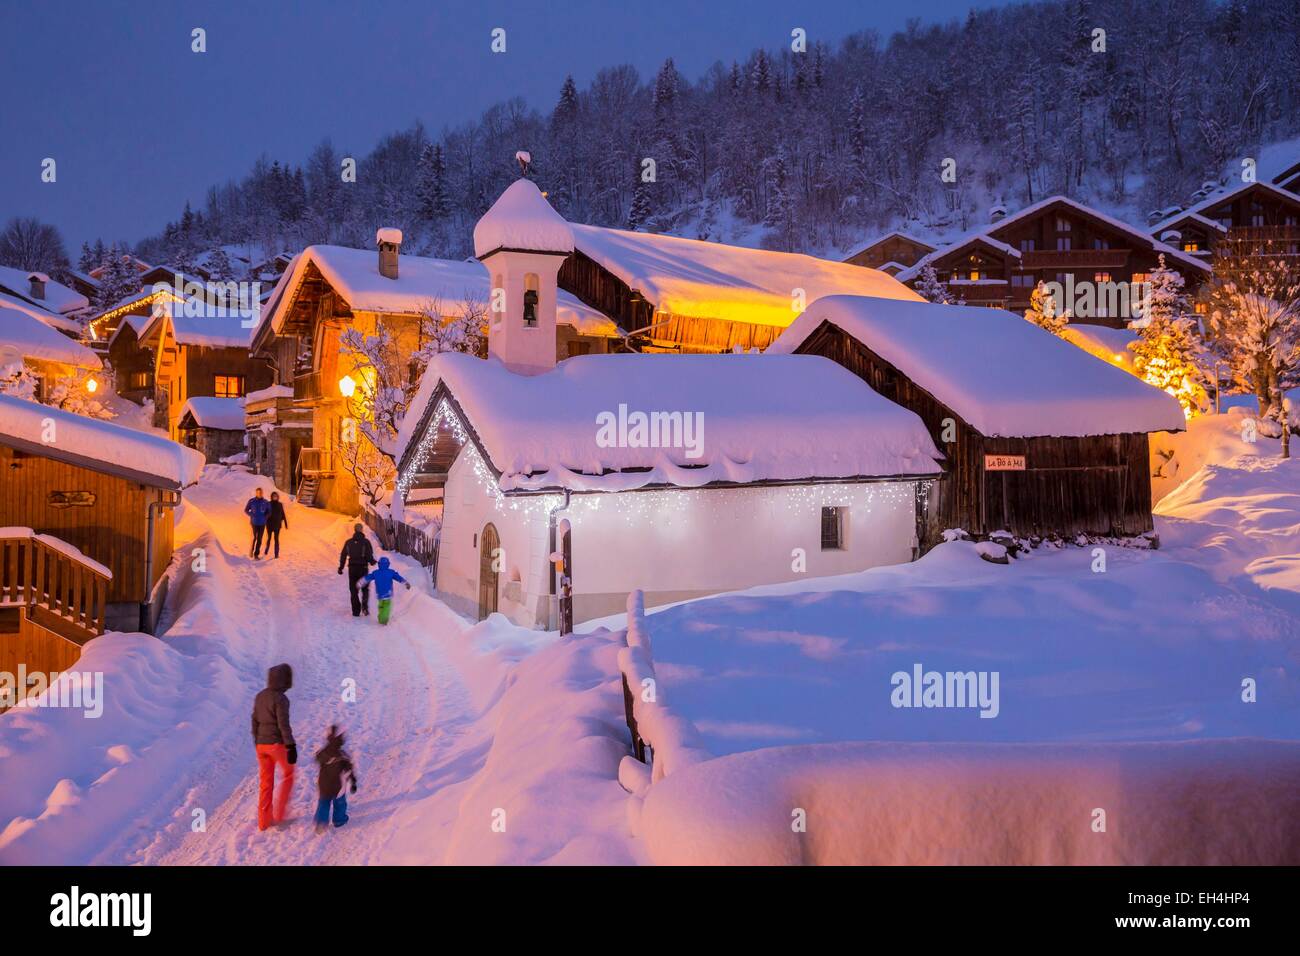 France, Savoie, Tarentaise valley, Meribel Village in the heart of Les Trois Vallees (The Three Valleys), the biggest ski area in the world with 600km of marked trails, western part of the Vanoise Massif, chapel Saint-Sebastien of 1633 Stock Photo